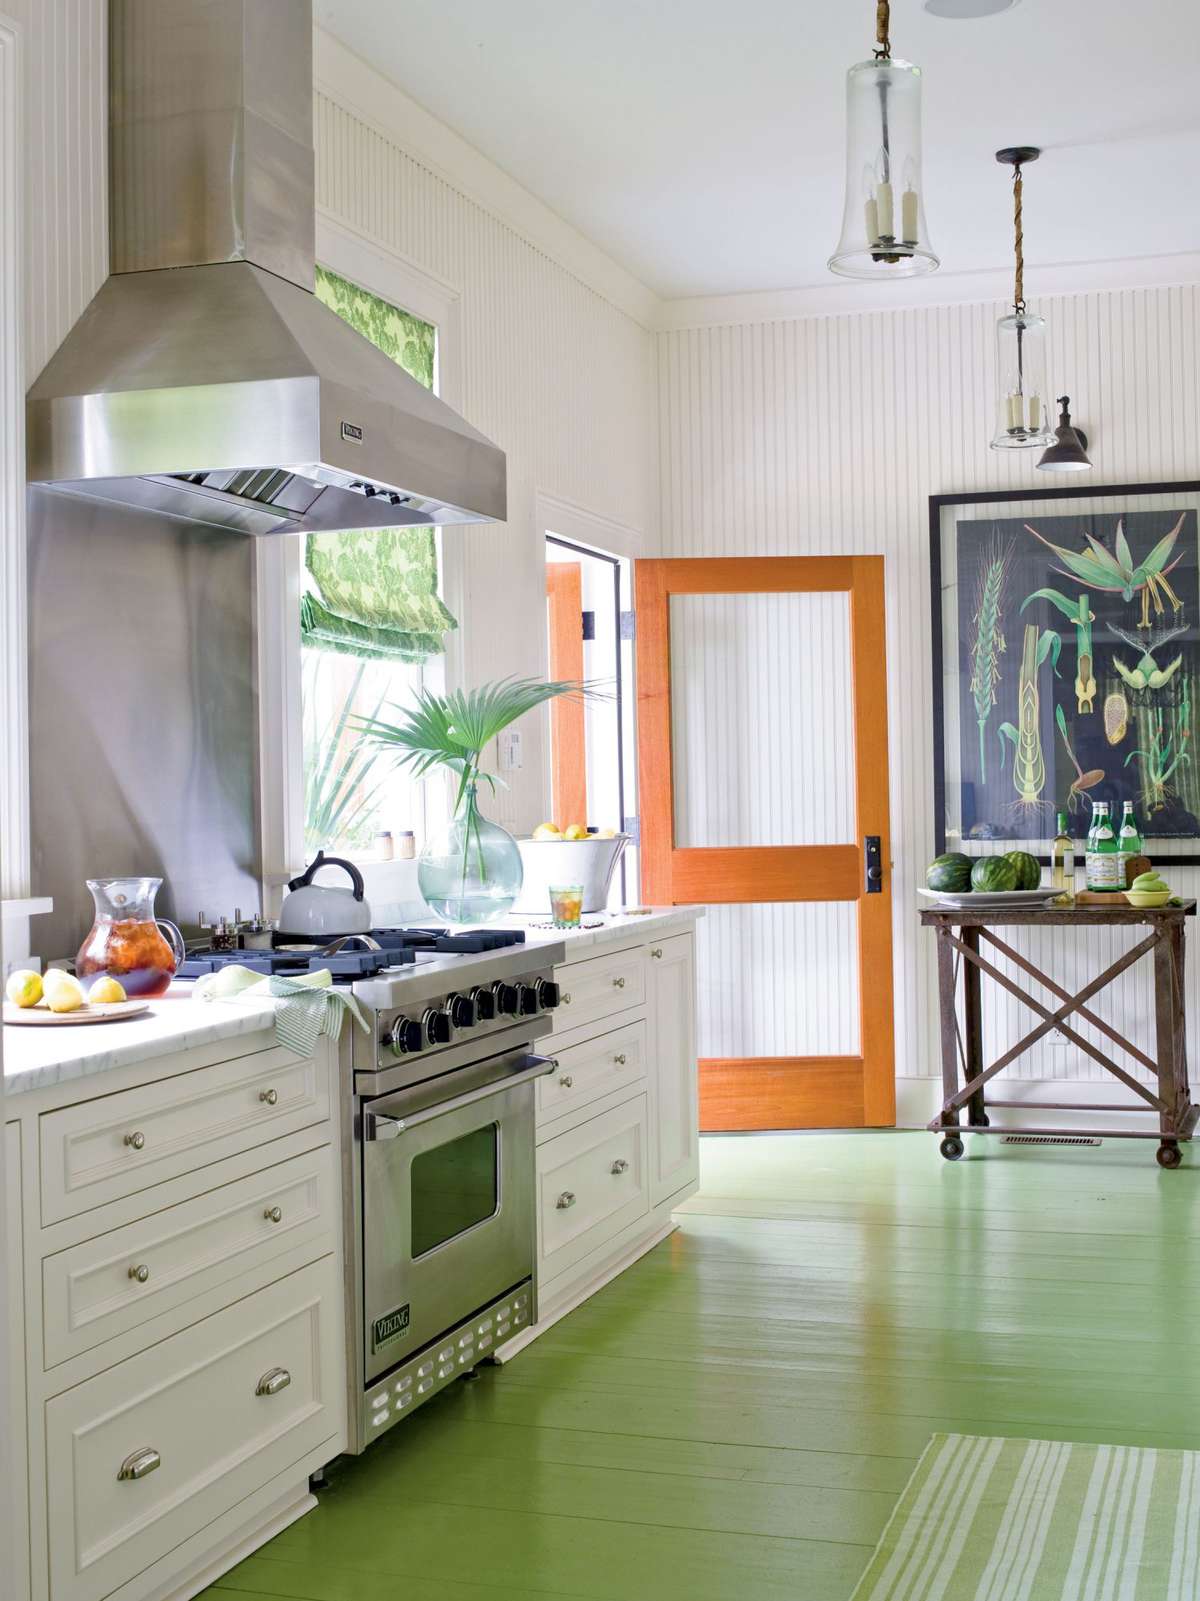 <p>The floor, painted a leafy green, highlights the kitchen's weathered, beachy feel as the boards start to show through. Vintage-inspired beaded board lends more character to the room, while the white keeps it fresh and crisp. The bright orange door adds a fun element that works best in beach cottages.</p>
                            